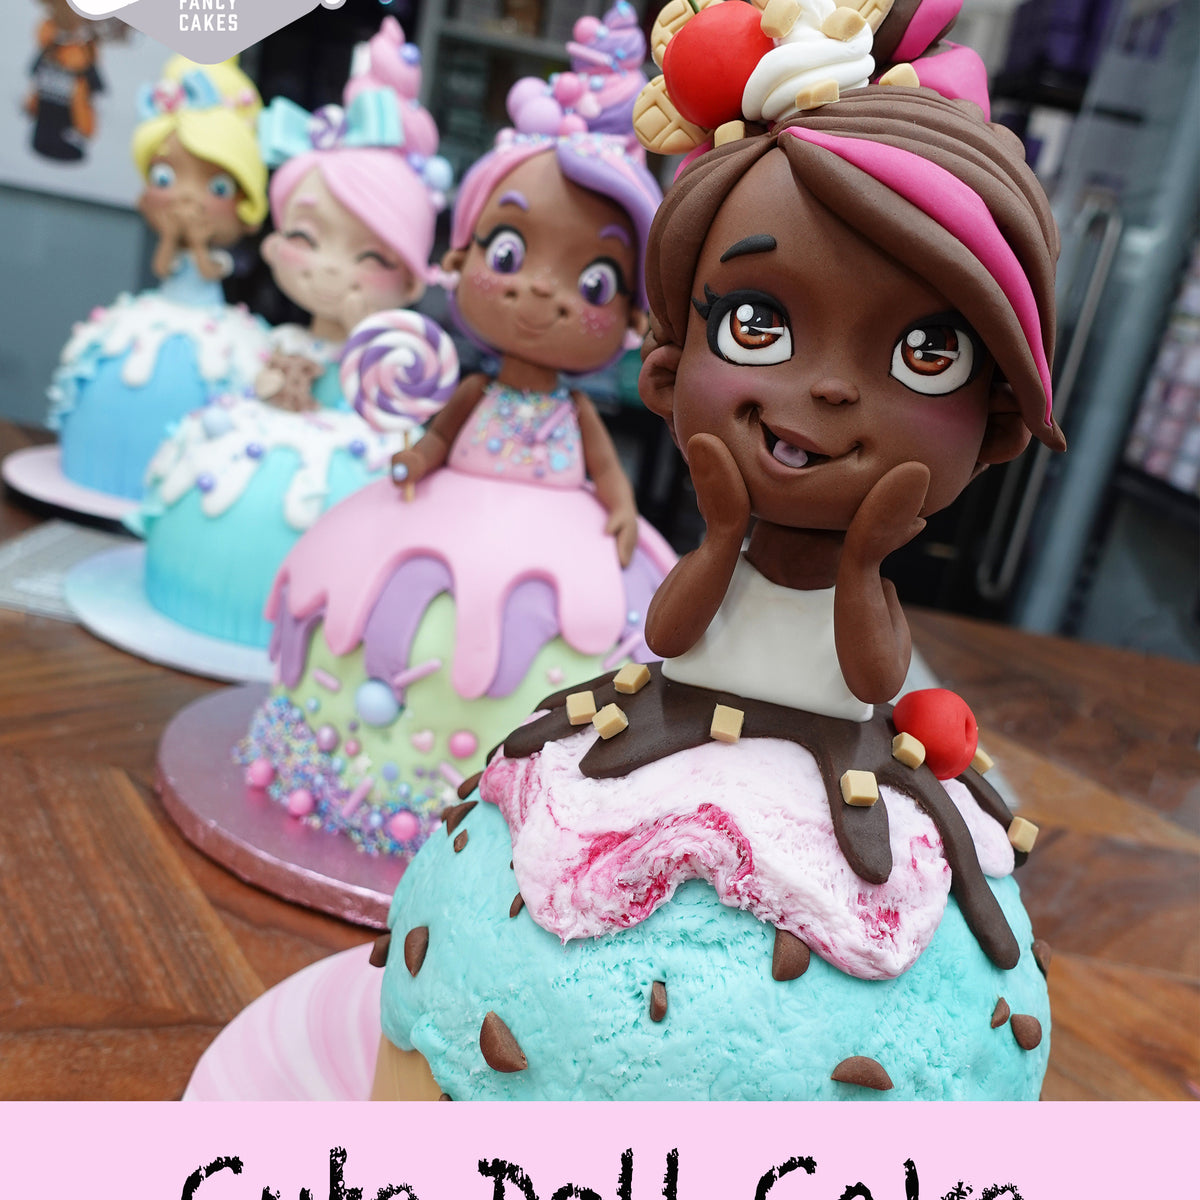 A Birthday Excursion to the American Girl Doll Store - South OC Moms